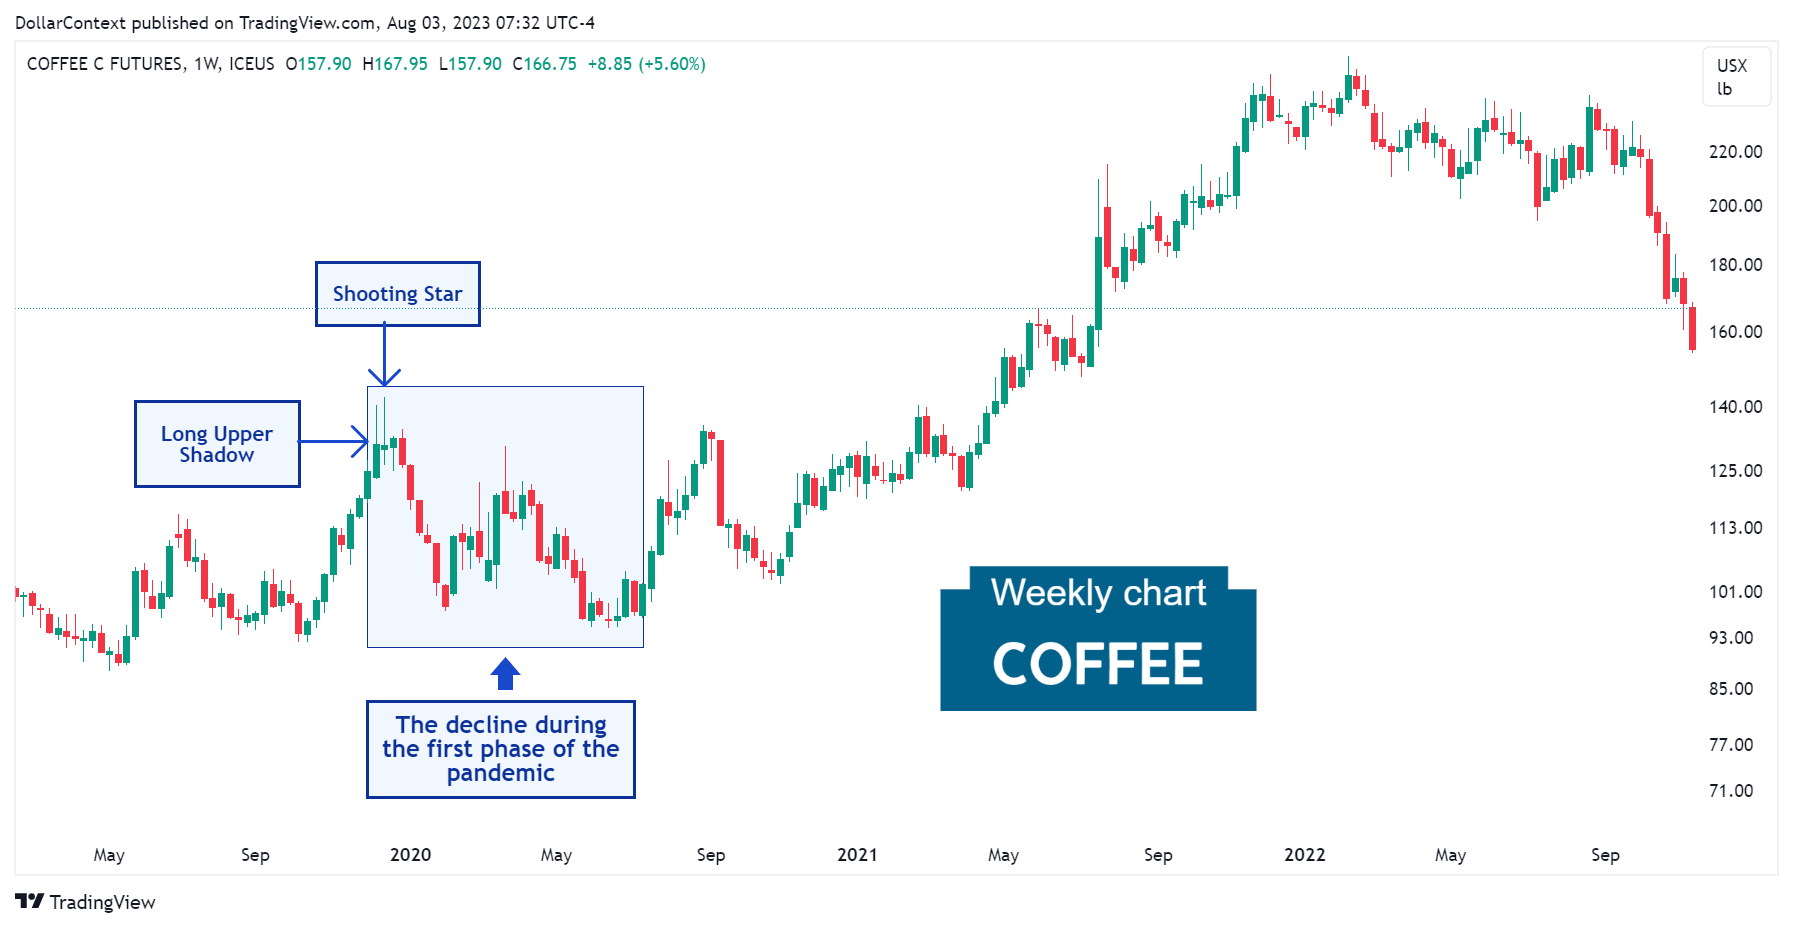 Coffee Prices During the Pandemic